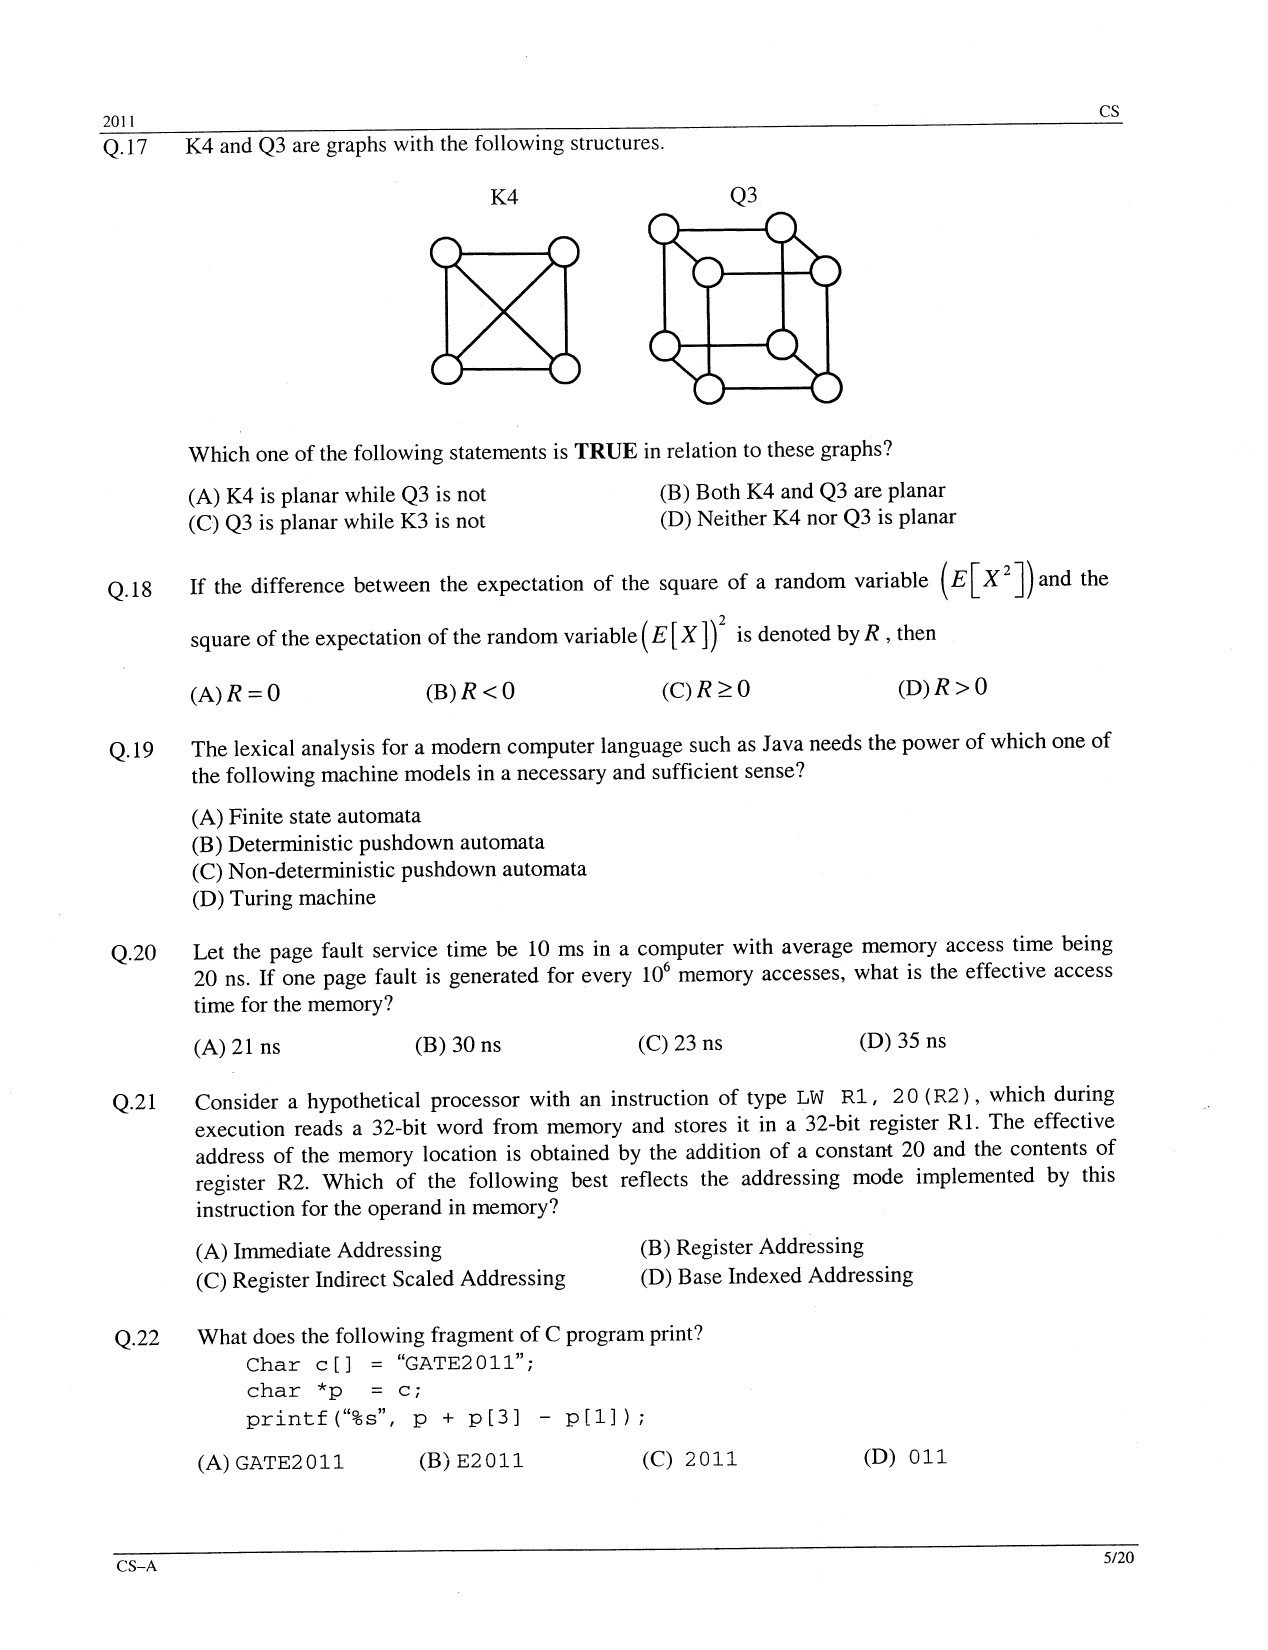 GATE Exam Question Paper 2011 Computer Science and Information Technology 5